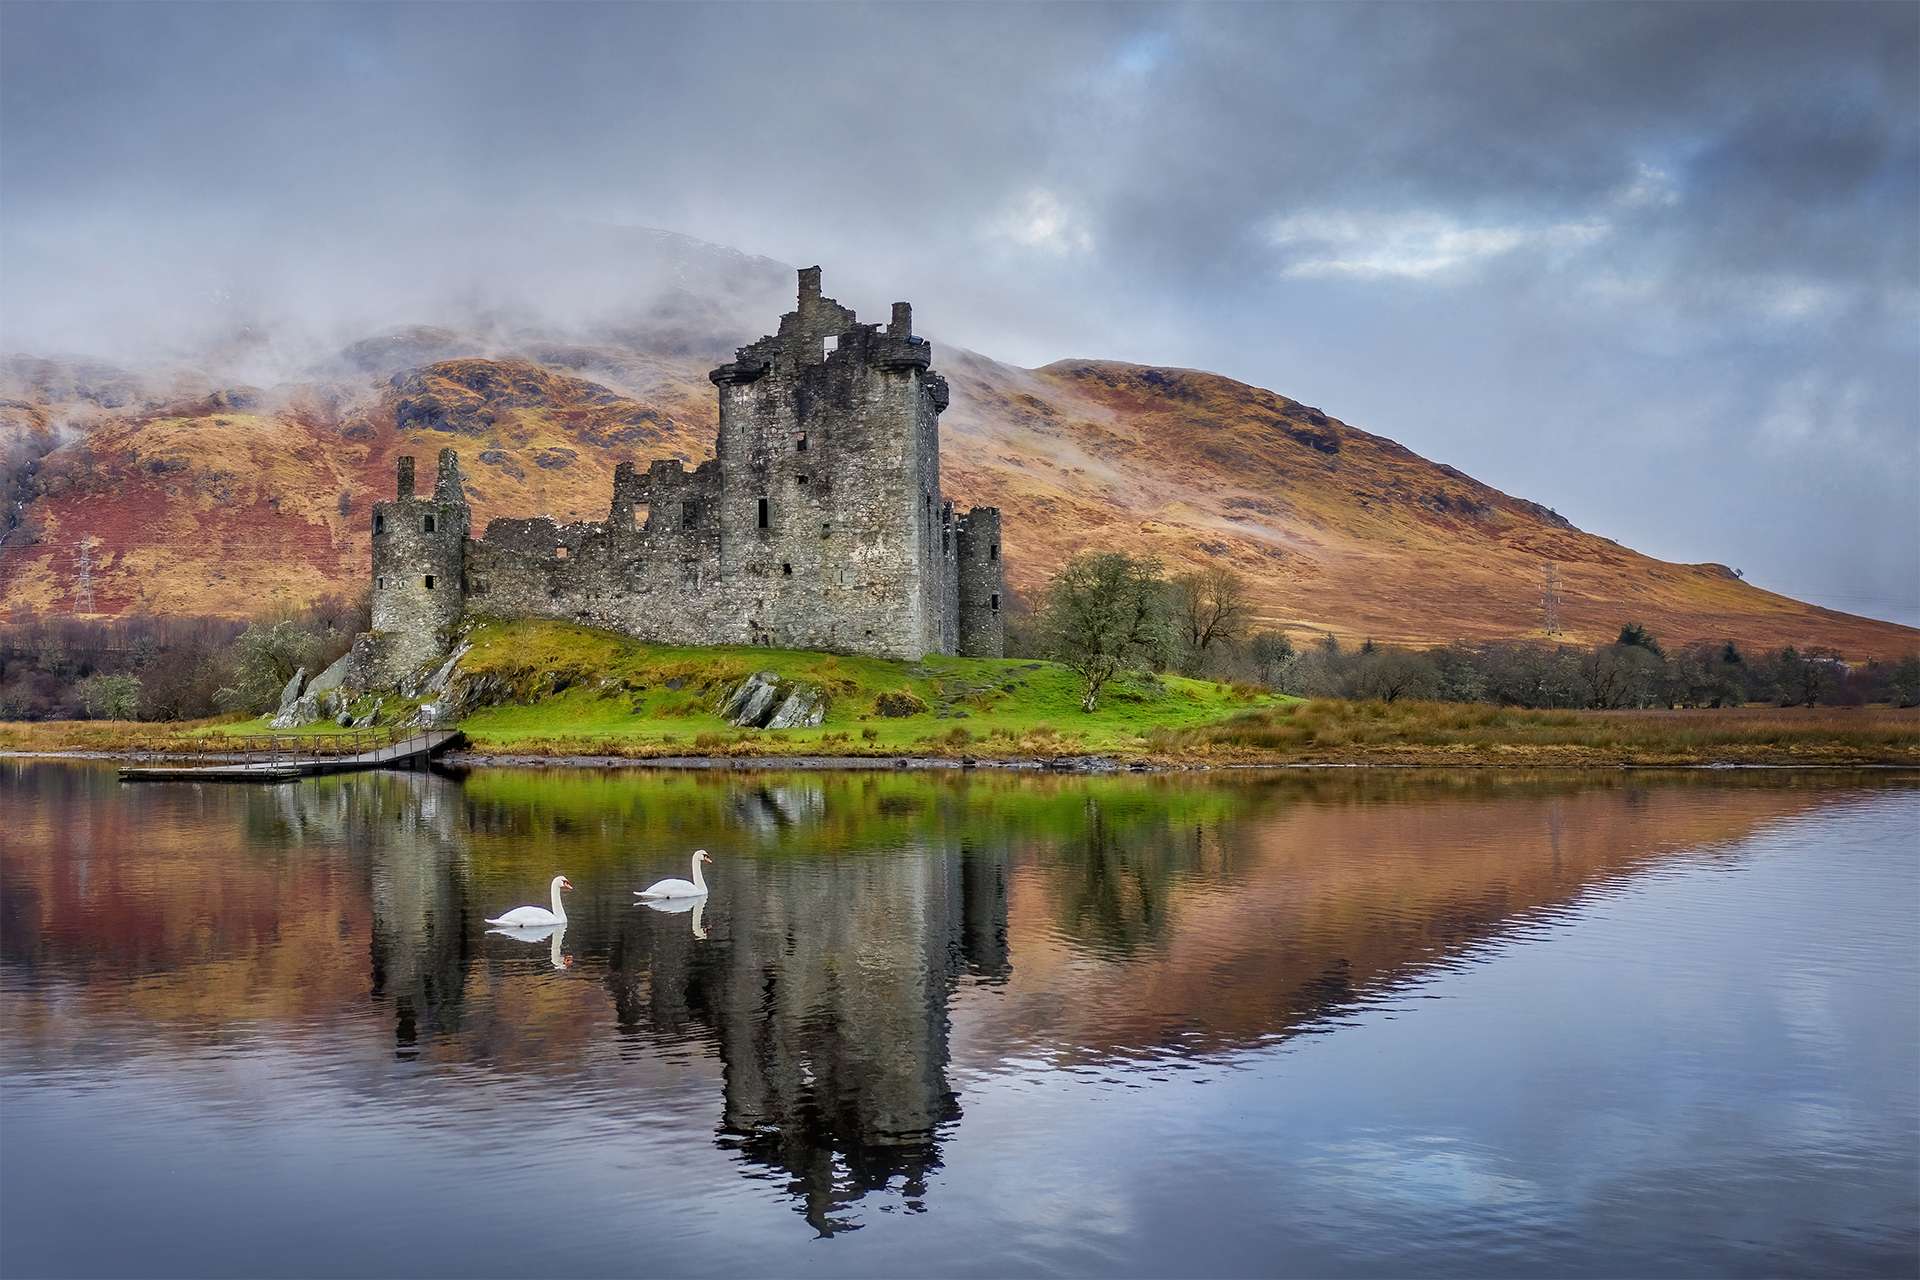 Kilchurn Castle on Loch Awe in the Scottish highlands near Glencoe and Oban. Historic castle in Scotland reflected in the loch with swans swimming past